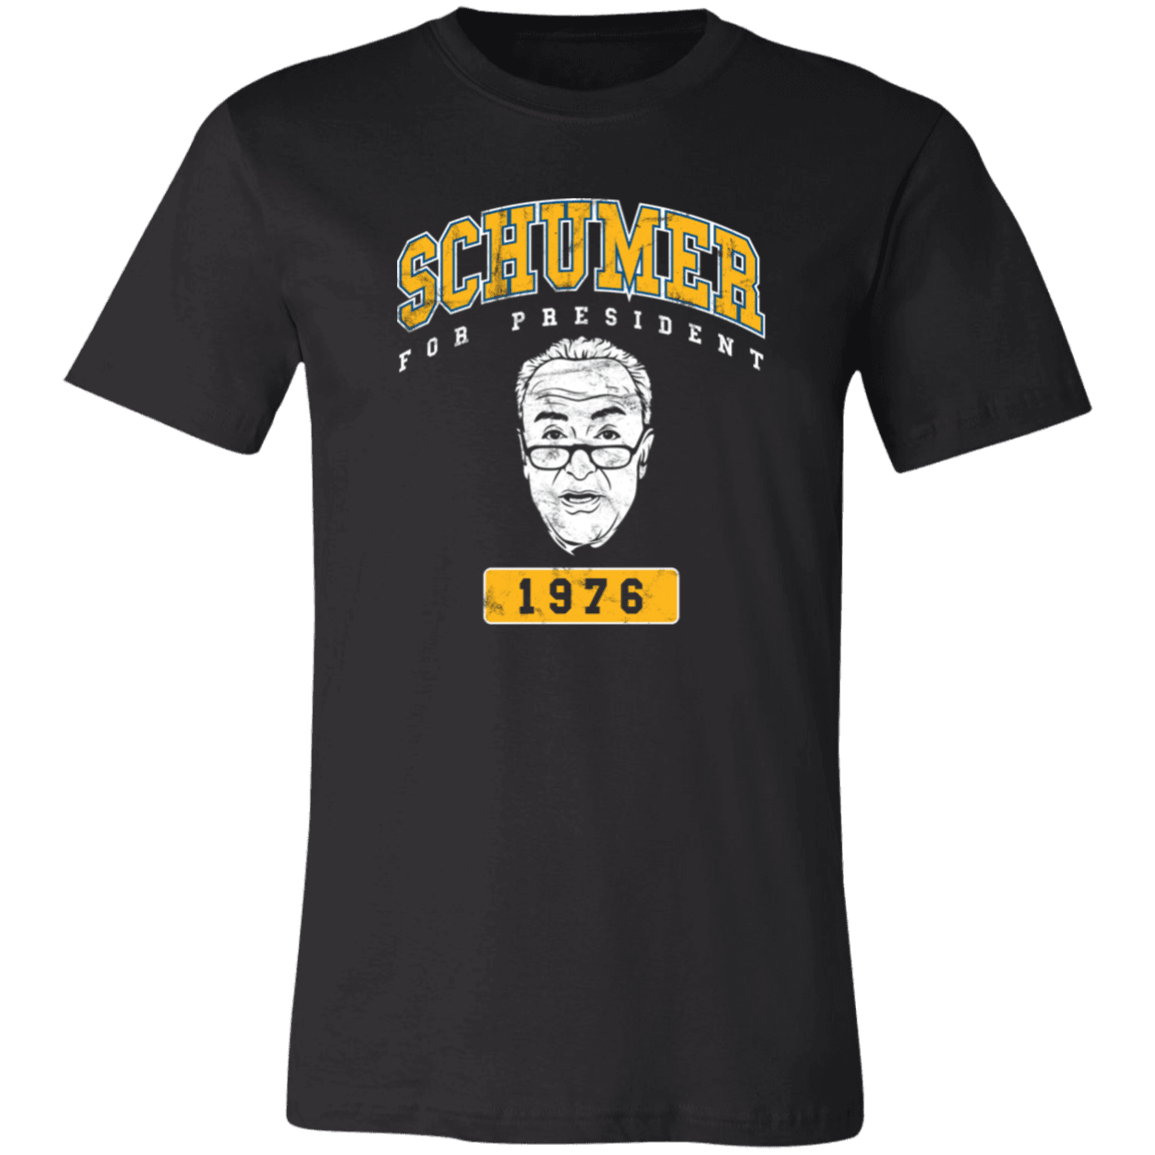 Designs by MyUtopia Shout Out:Schumer for President Unisex Jersey Short-Sleeve T-Shirt,X-Small / Black,Adult Unisex T-Shirt